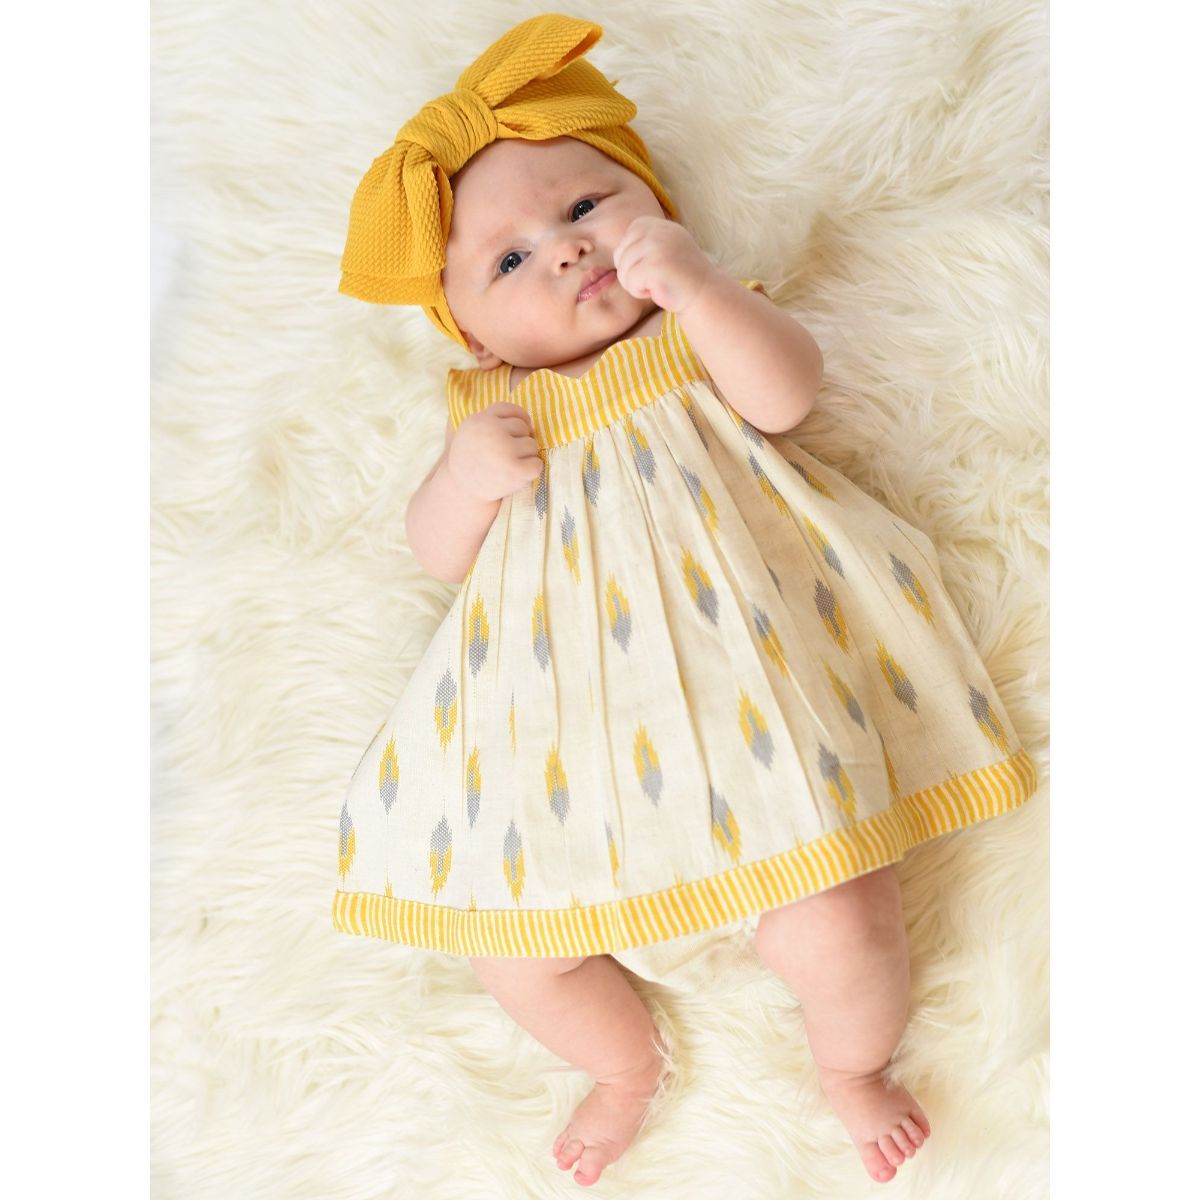 Cute baby girl in yellow band and dress sits in - stock photo 1552990 |  Crushpixel